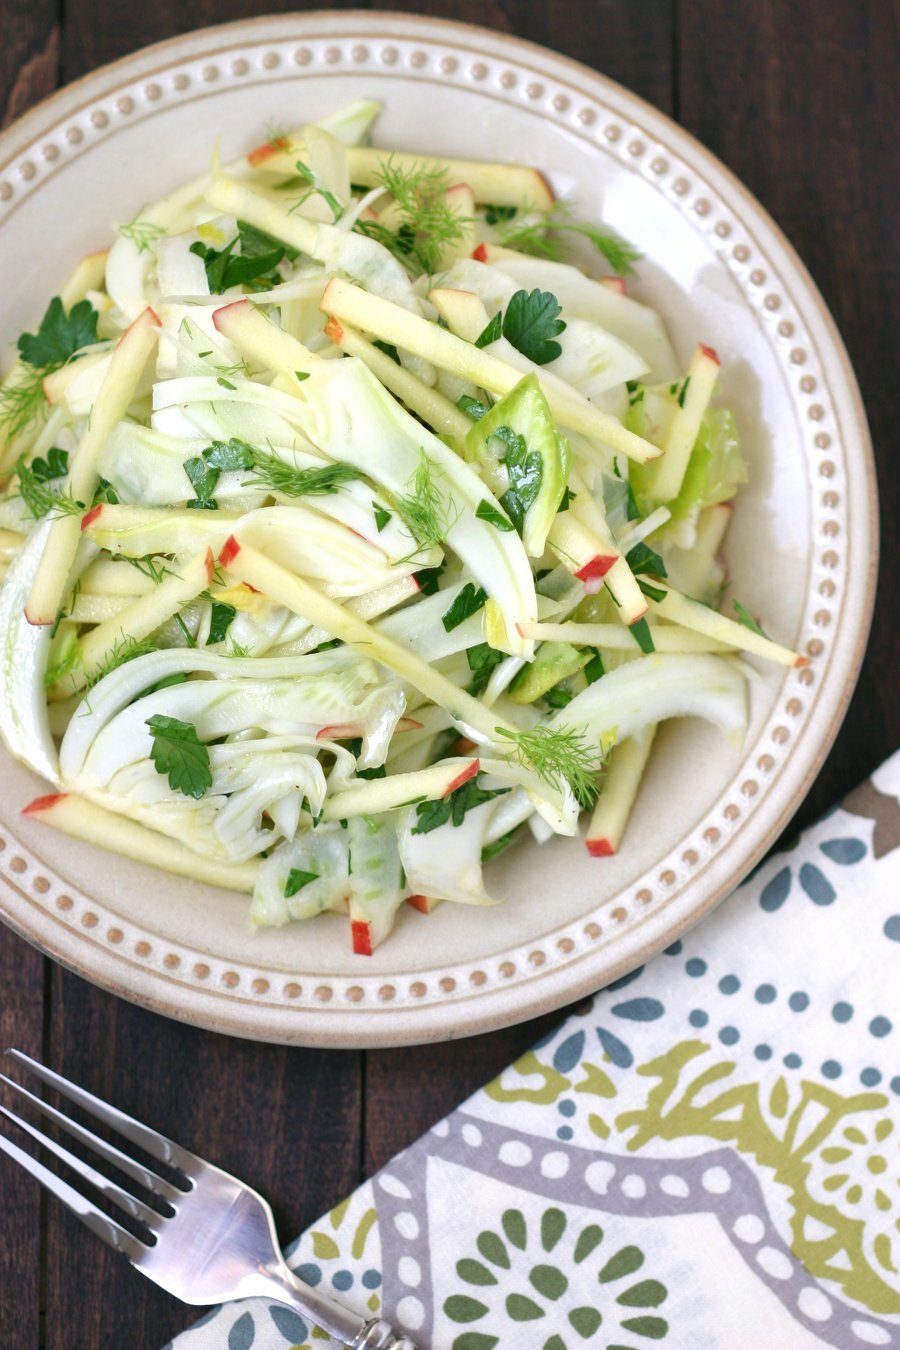 This light, crunchy, and refreshing recipe for Fennel Apple Salad with Endive combines fragrant fresh fennel with sweet-tart apples.